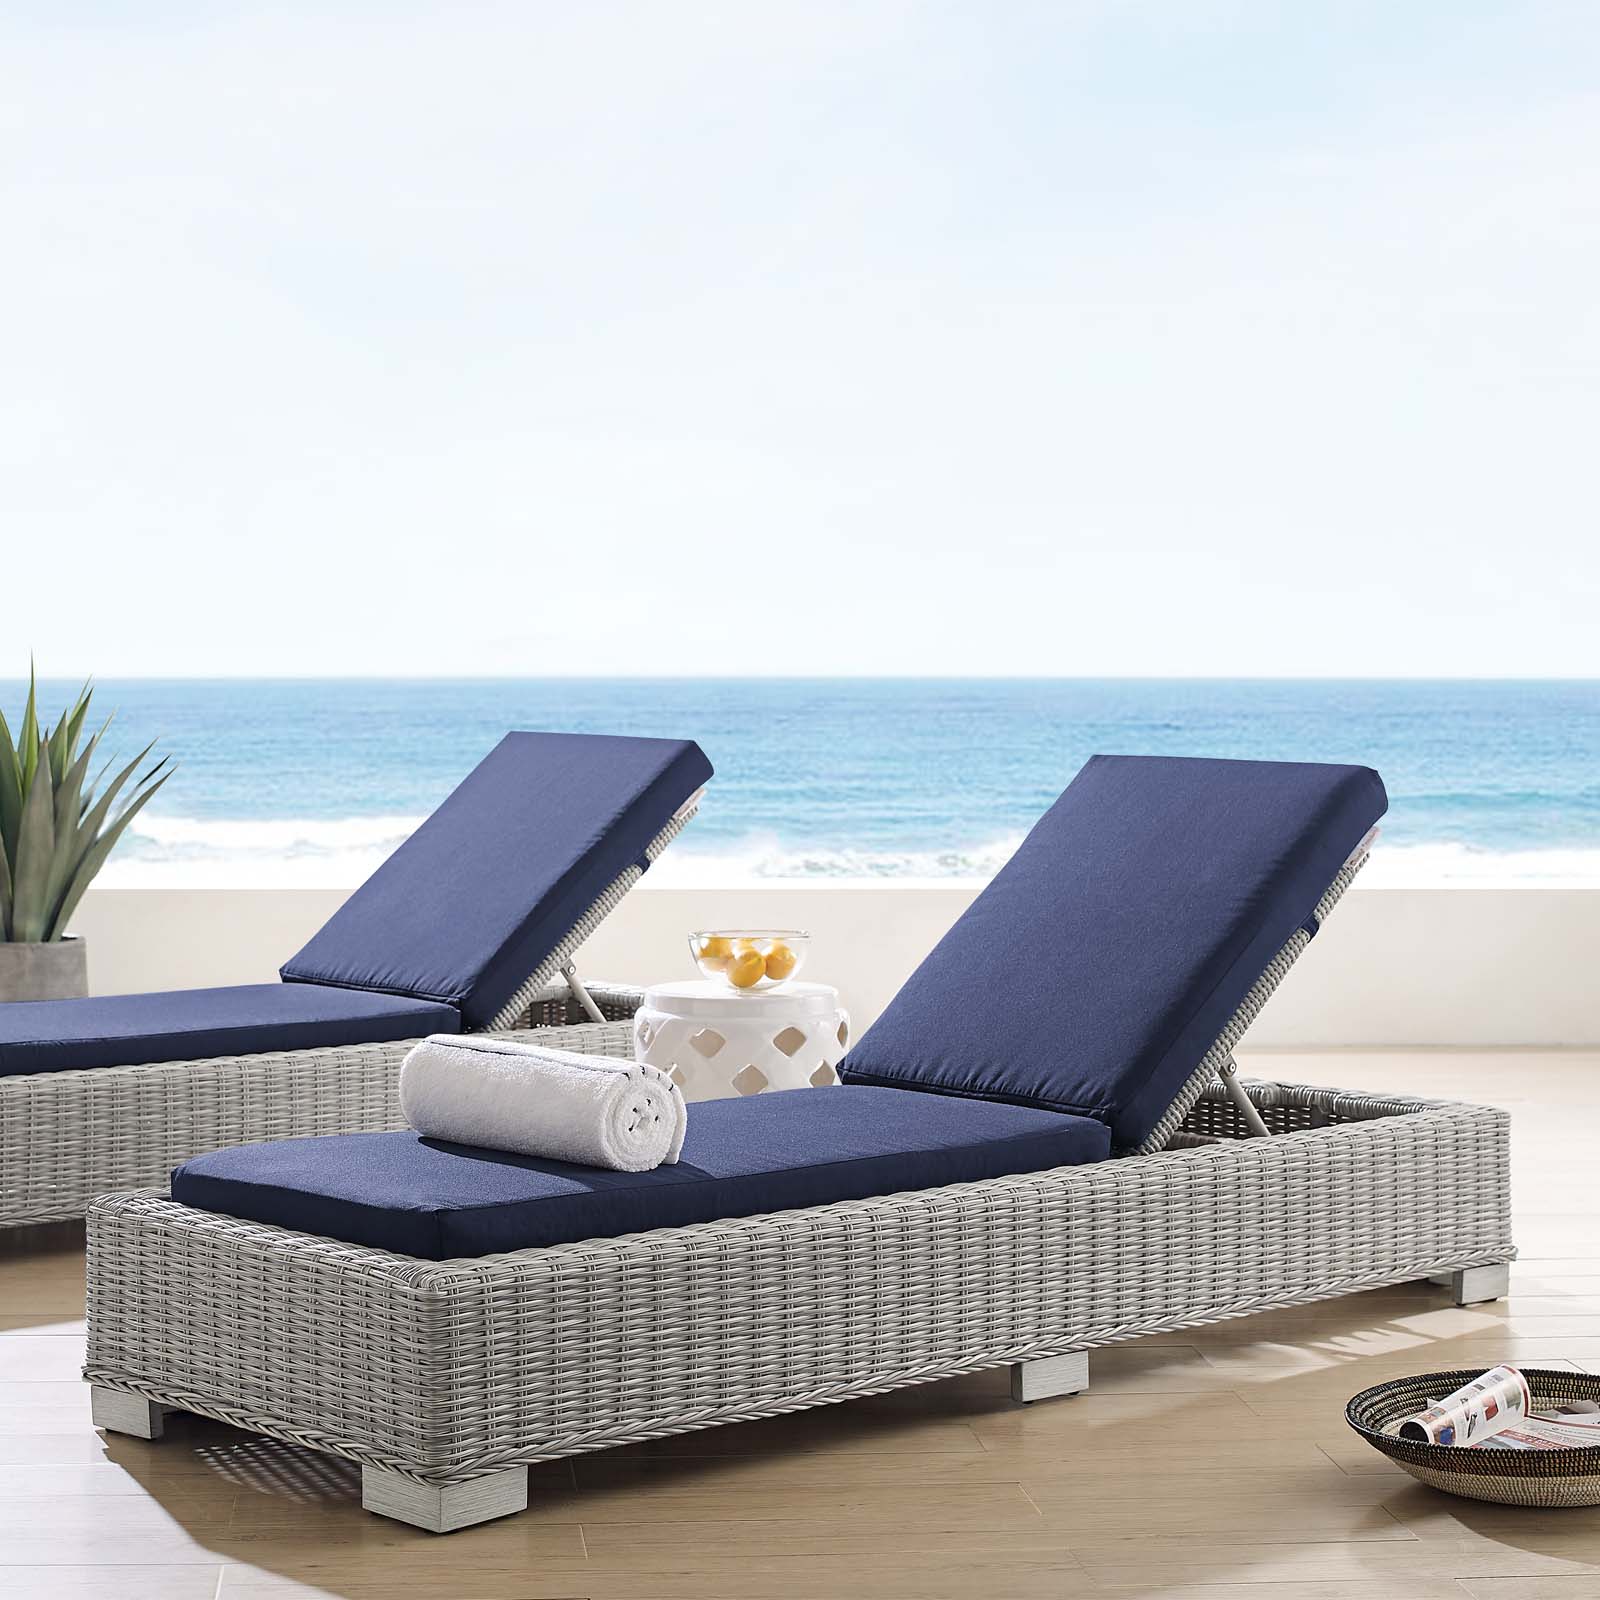 Modway Conway Sunbrella? Outdoor Patio Wicker Rattan Chaise Lounge in Light Gray Navy - image 1 of 10